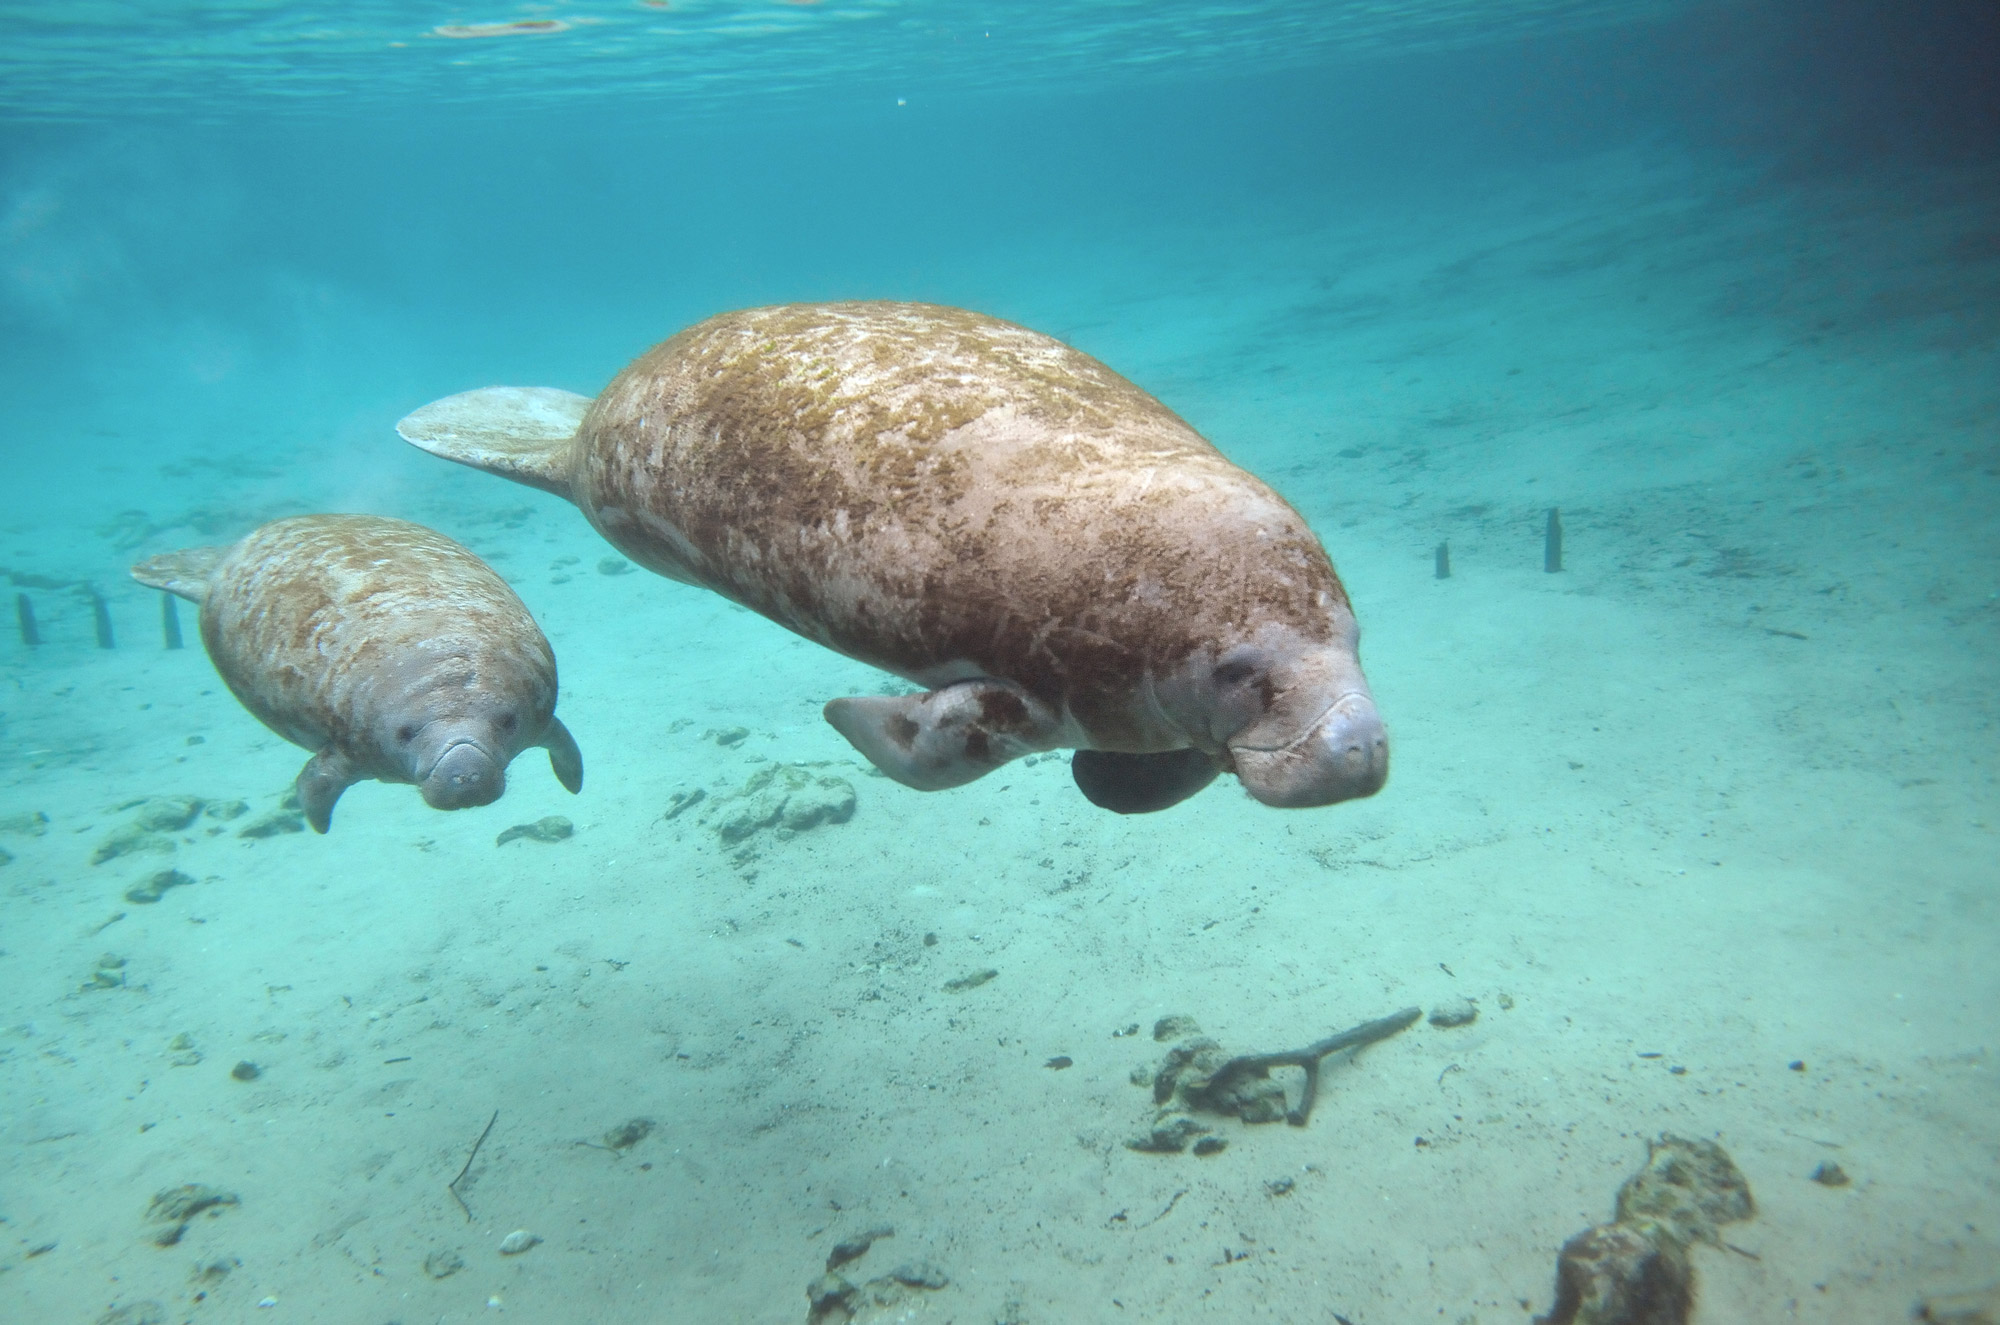 One of the best things to do in Citrus Springs is to swim with manatees